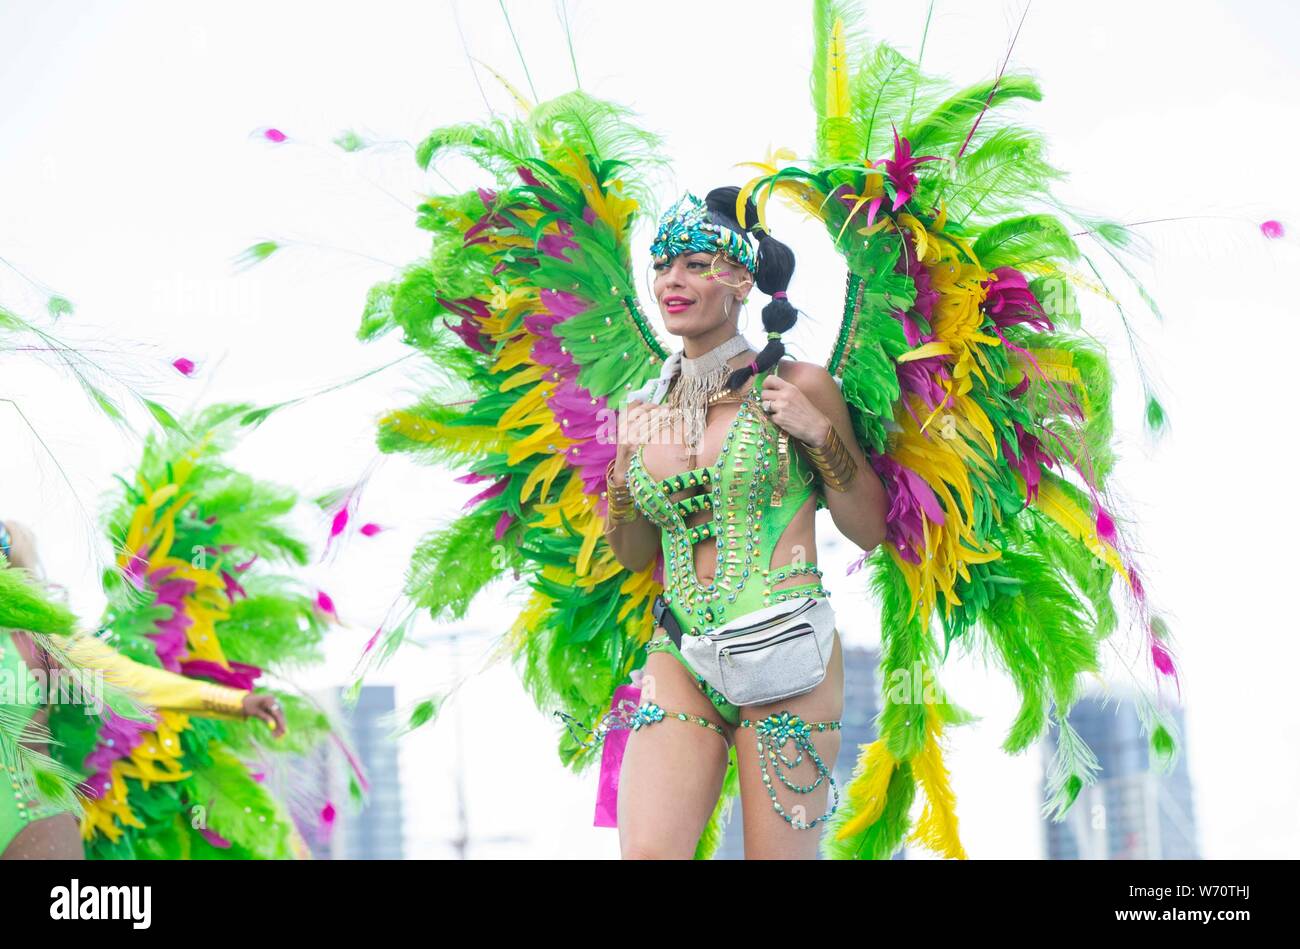 (190804) -- TORONTO, Aug. 4, 2019 (Xinhua) -- A dressed up reveller takes part in the 2019 Toronto Caribbean Carnival Grand Parade in Toronto, Canada, Aug. 3, 2019. People from near and far converged on the street for the annual Caribbean Carnival Grand Parade here on Saturday. (Xinhua/Zou Zheng) Stock Photo